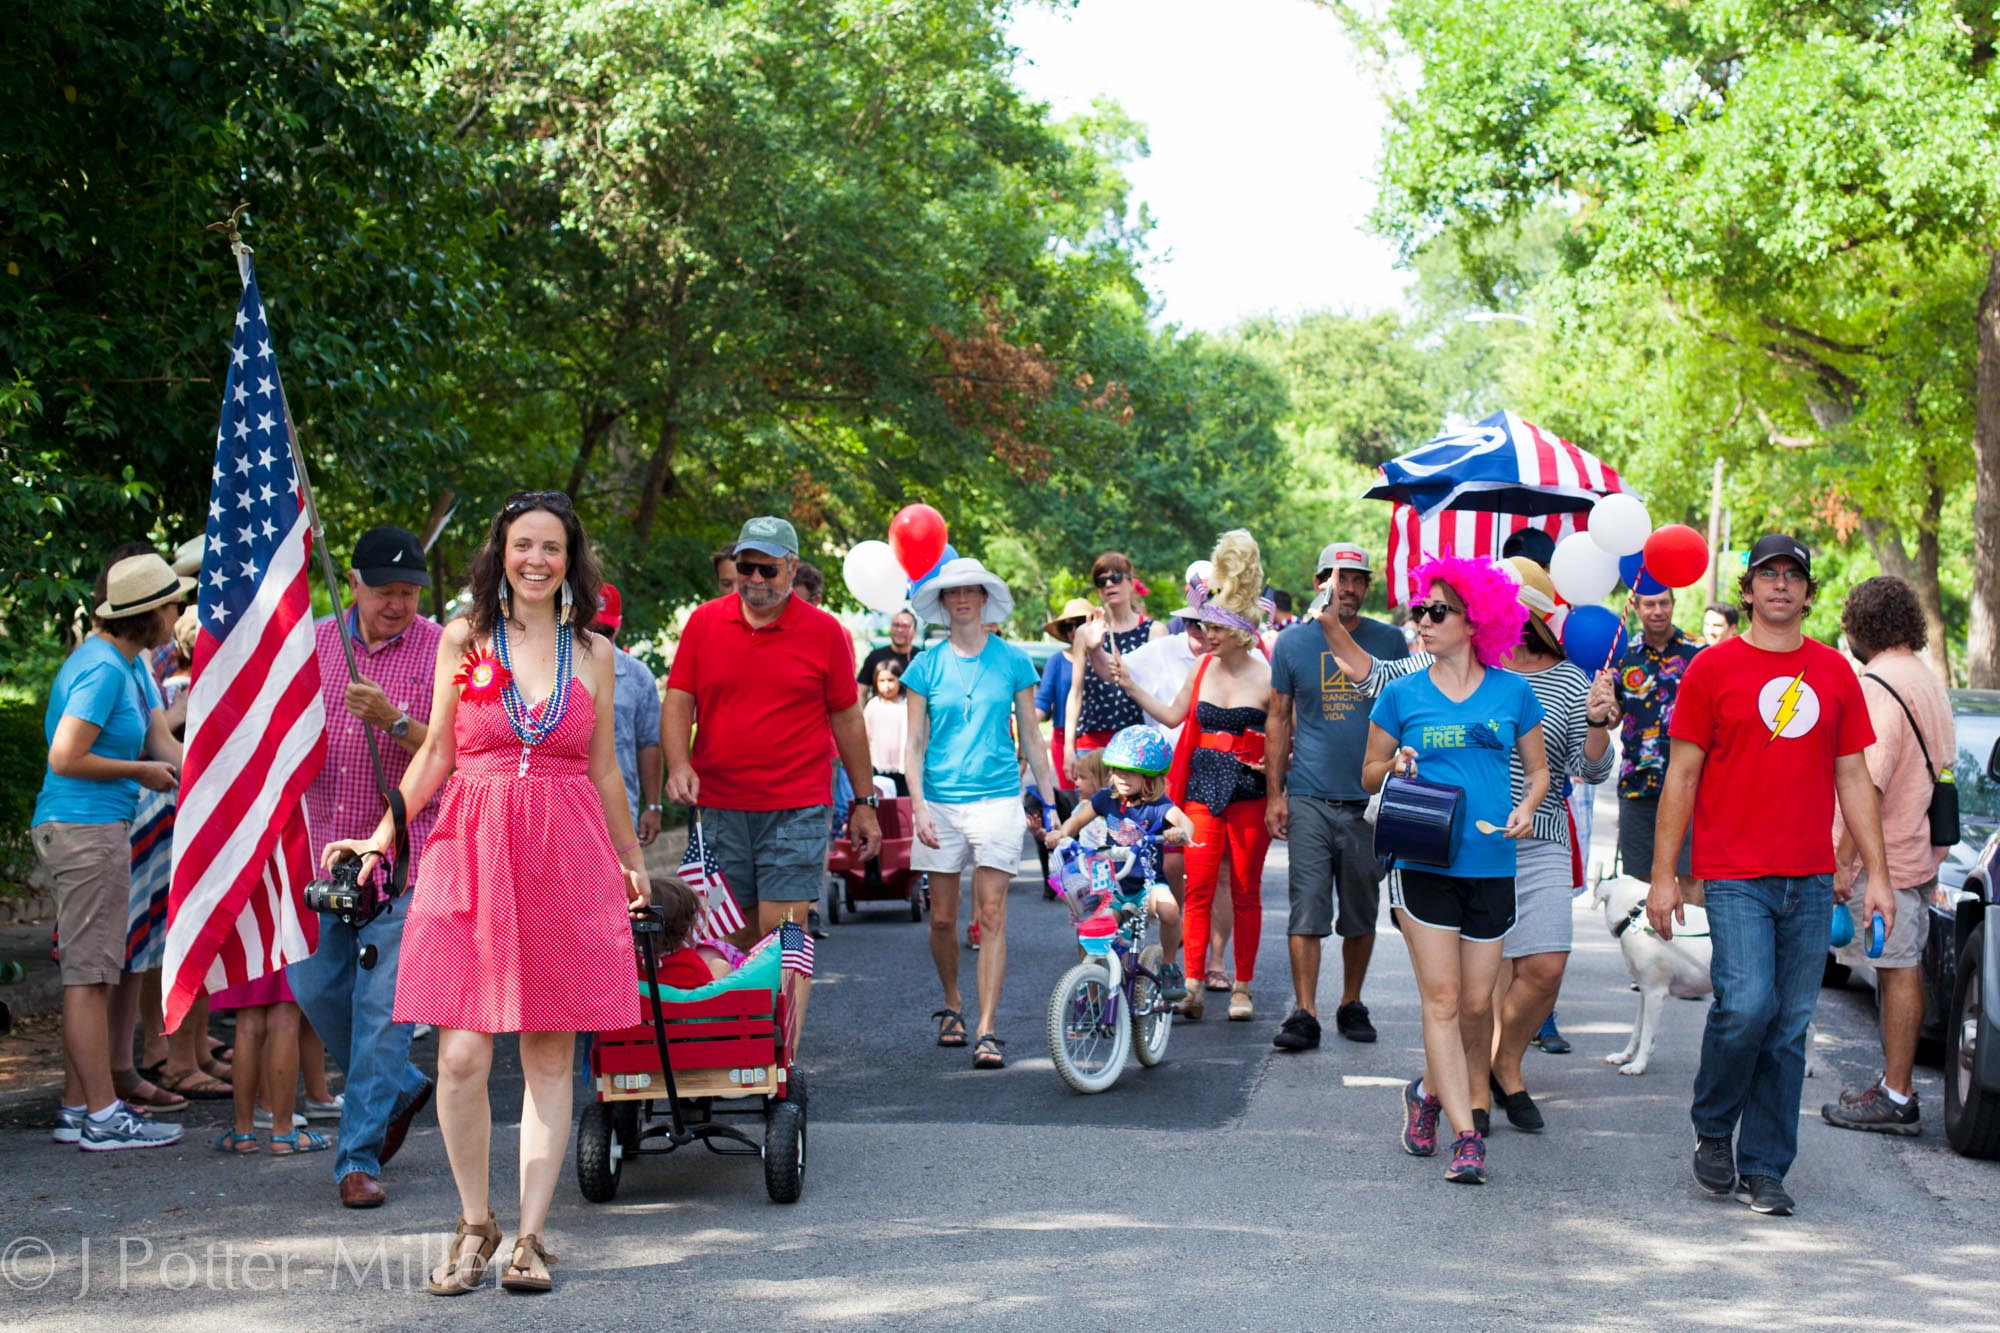 French Place 4th of July parade-5.edw.jpg